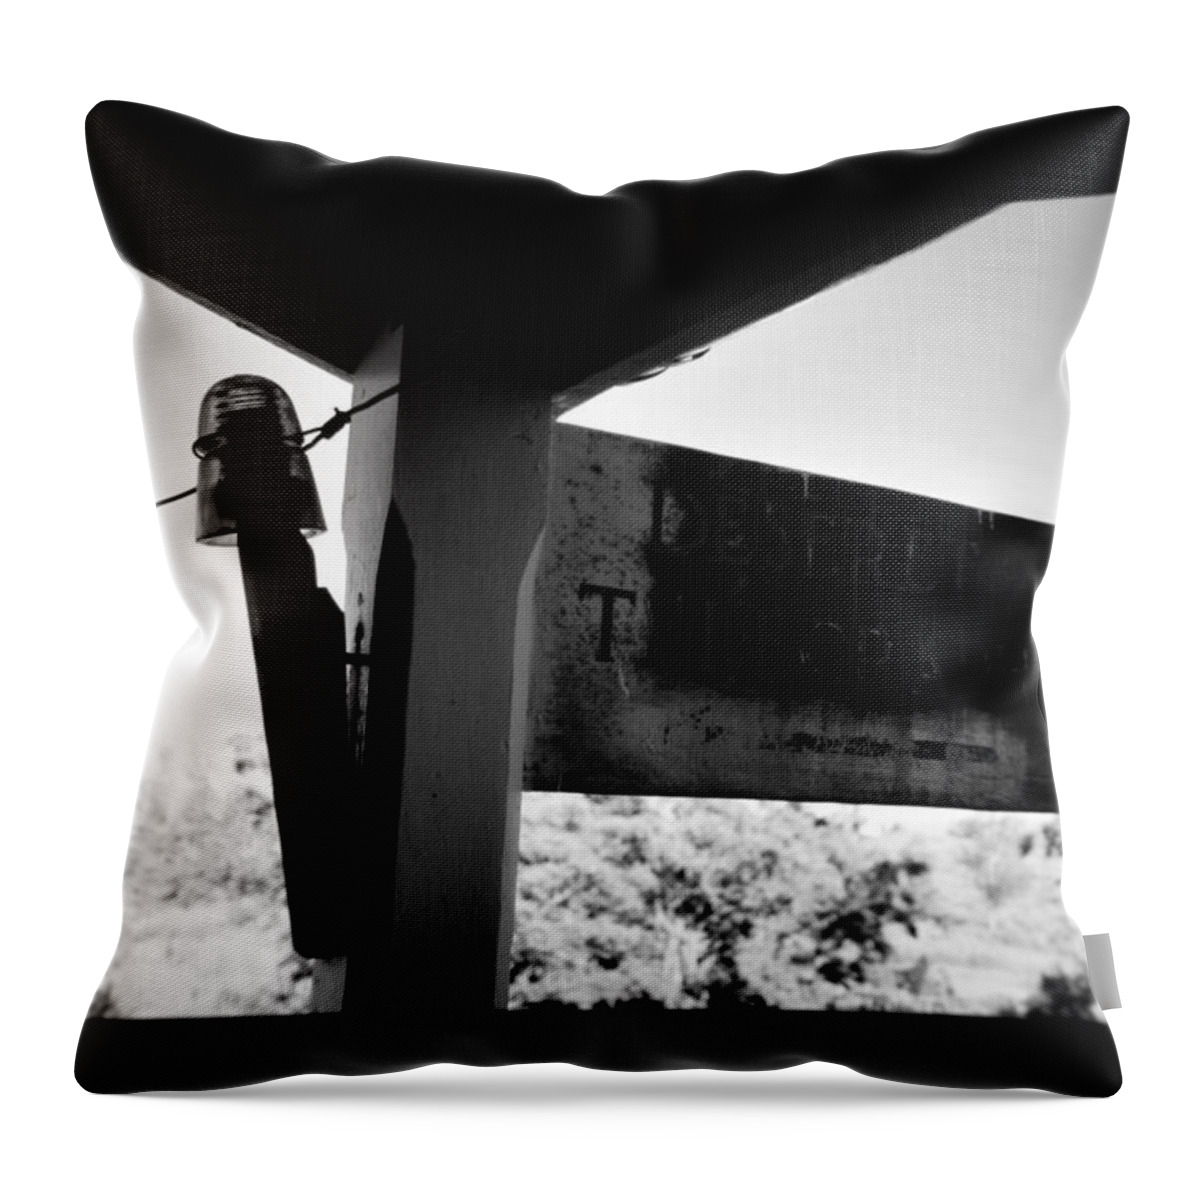 Fine Art Photography Throw Pillow featuring the photograph Deseret Telegraph Office by David Lee Thompson